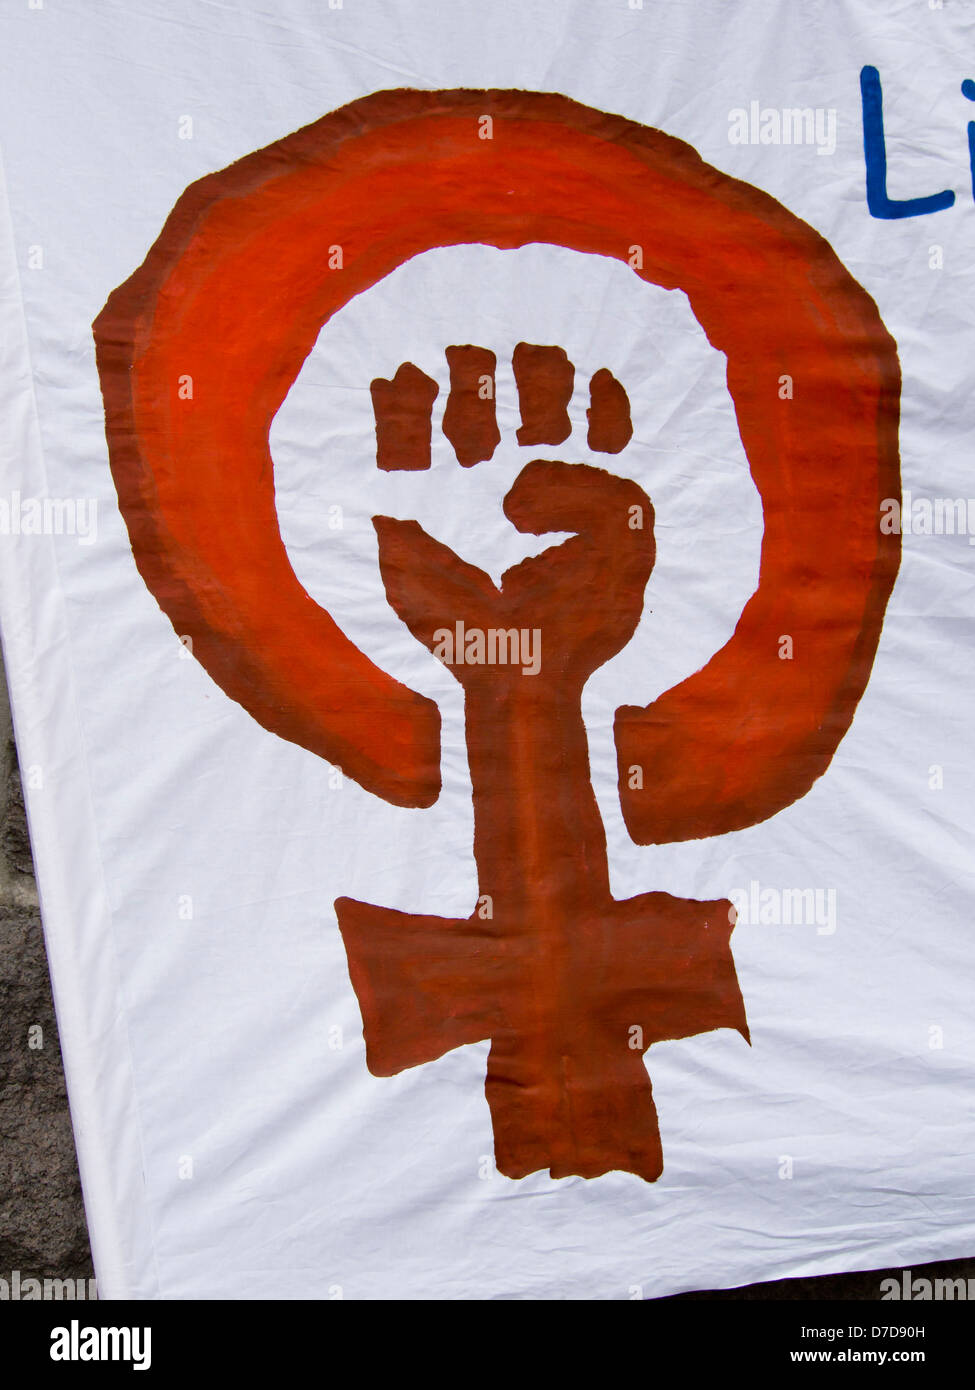 May 1 2013, labour day celebrations in Oslo Norway, equal rights, women power symbol on banner, closed fist Stock Photo